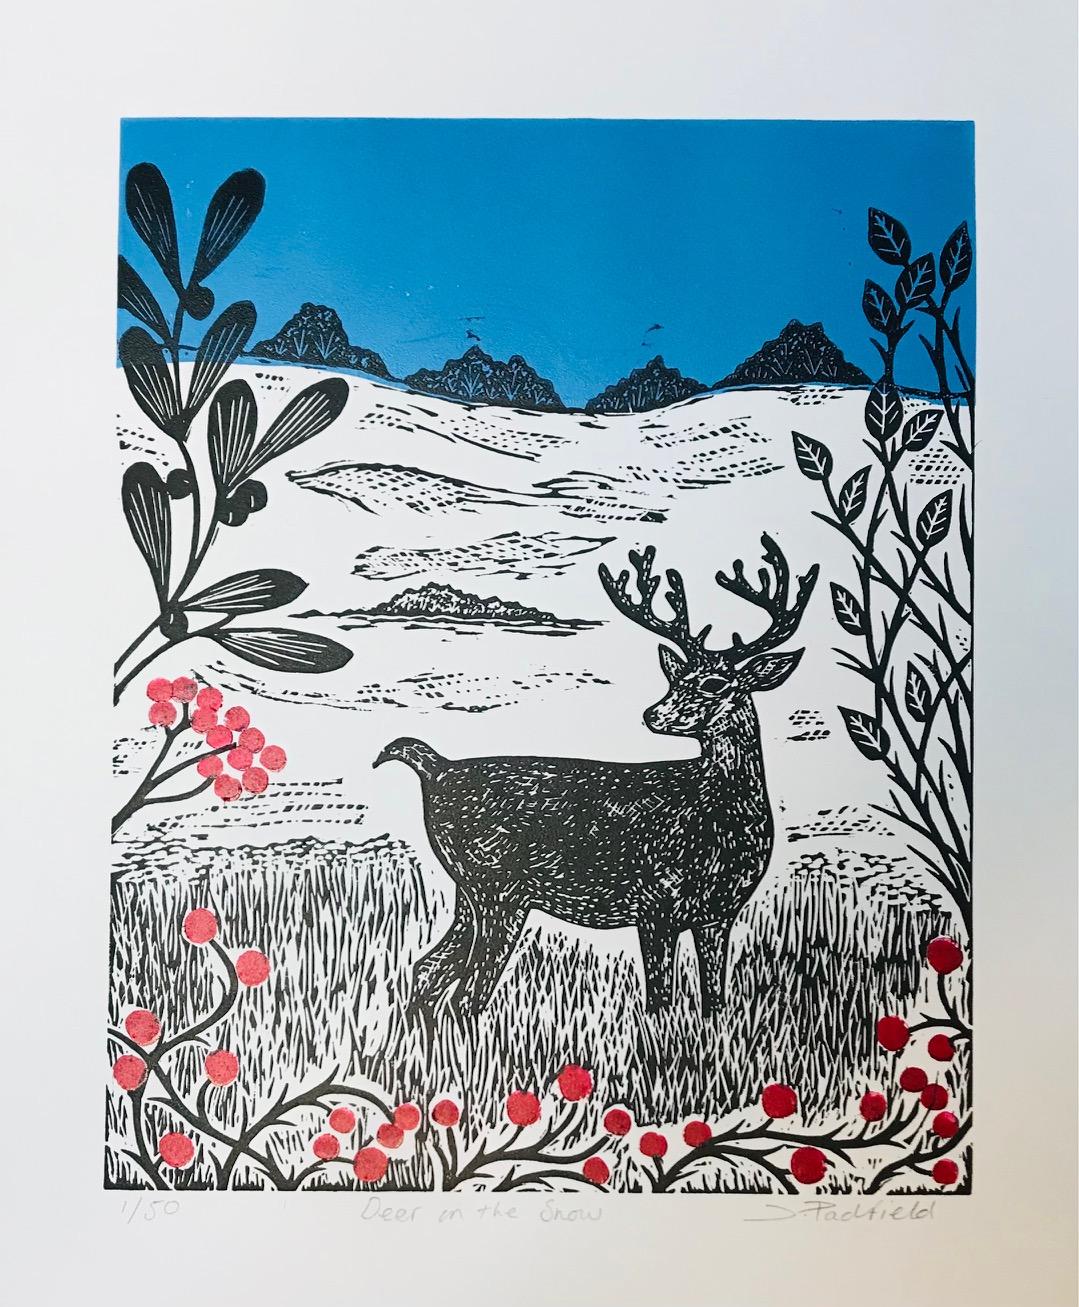 Deer in the Snow is a limited edition, multi block, linocut print of a Roe Deer standing in the snow. Surrounding the deer are deep red berries, Mistletoe and winter leaves. There are trees in the distance and a blue sky. The inspiration for this